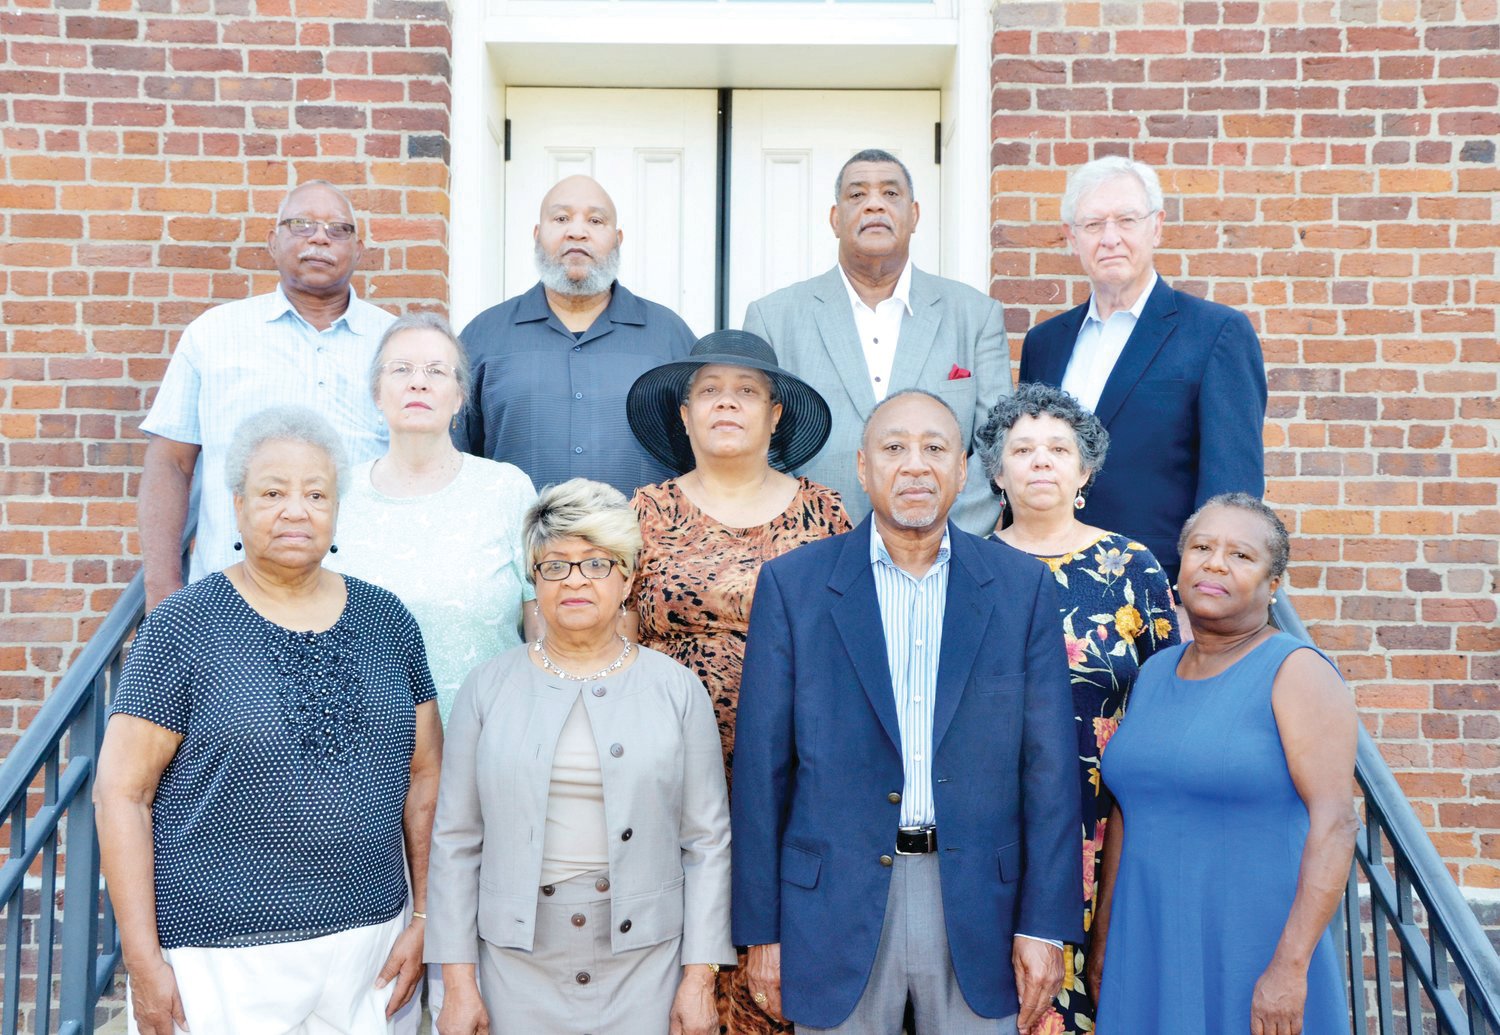 In this file photo, members of Chatham County's two NAACP chapters involved in an effort to memorialize the six victims of racial terror lynching in Chatham stand on the steps of the PIttsboro courthouse. This same group was involved in the creation of the Community Remembrance Coalition. Front row, from left: Armentha Davis, Mary Harris, Larry Brooks and Mary Nettles. Middle row, from left: Vickie Shea, Cledia Holland and Linda Batley. Back row, from left: Glenn Fox, Wayne Holland, Carl Thompson and Bob Pearson. Pearson, a retired attorney and diplomat who lives in Fearrington Village, was responsible for getting the effort started.